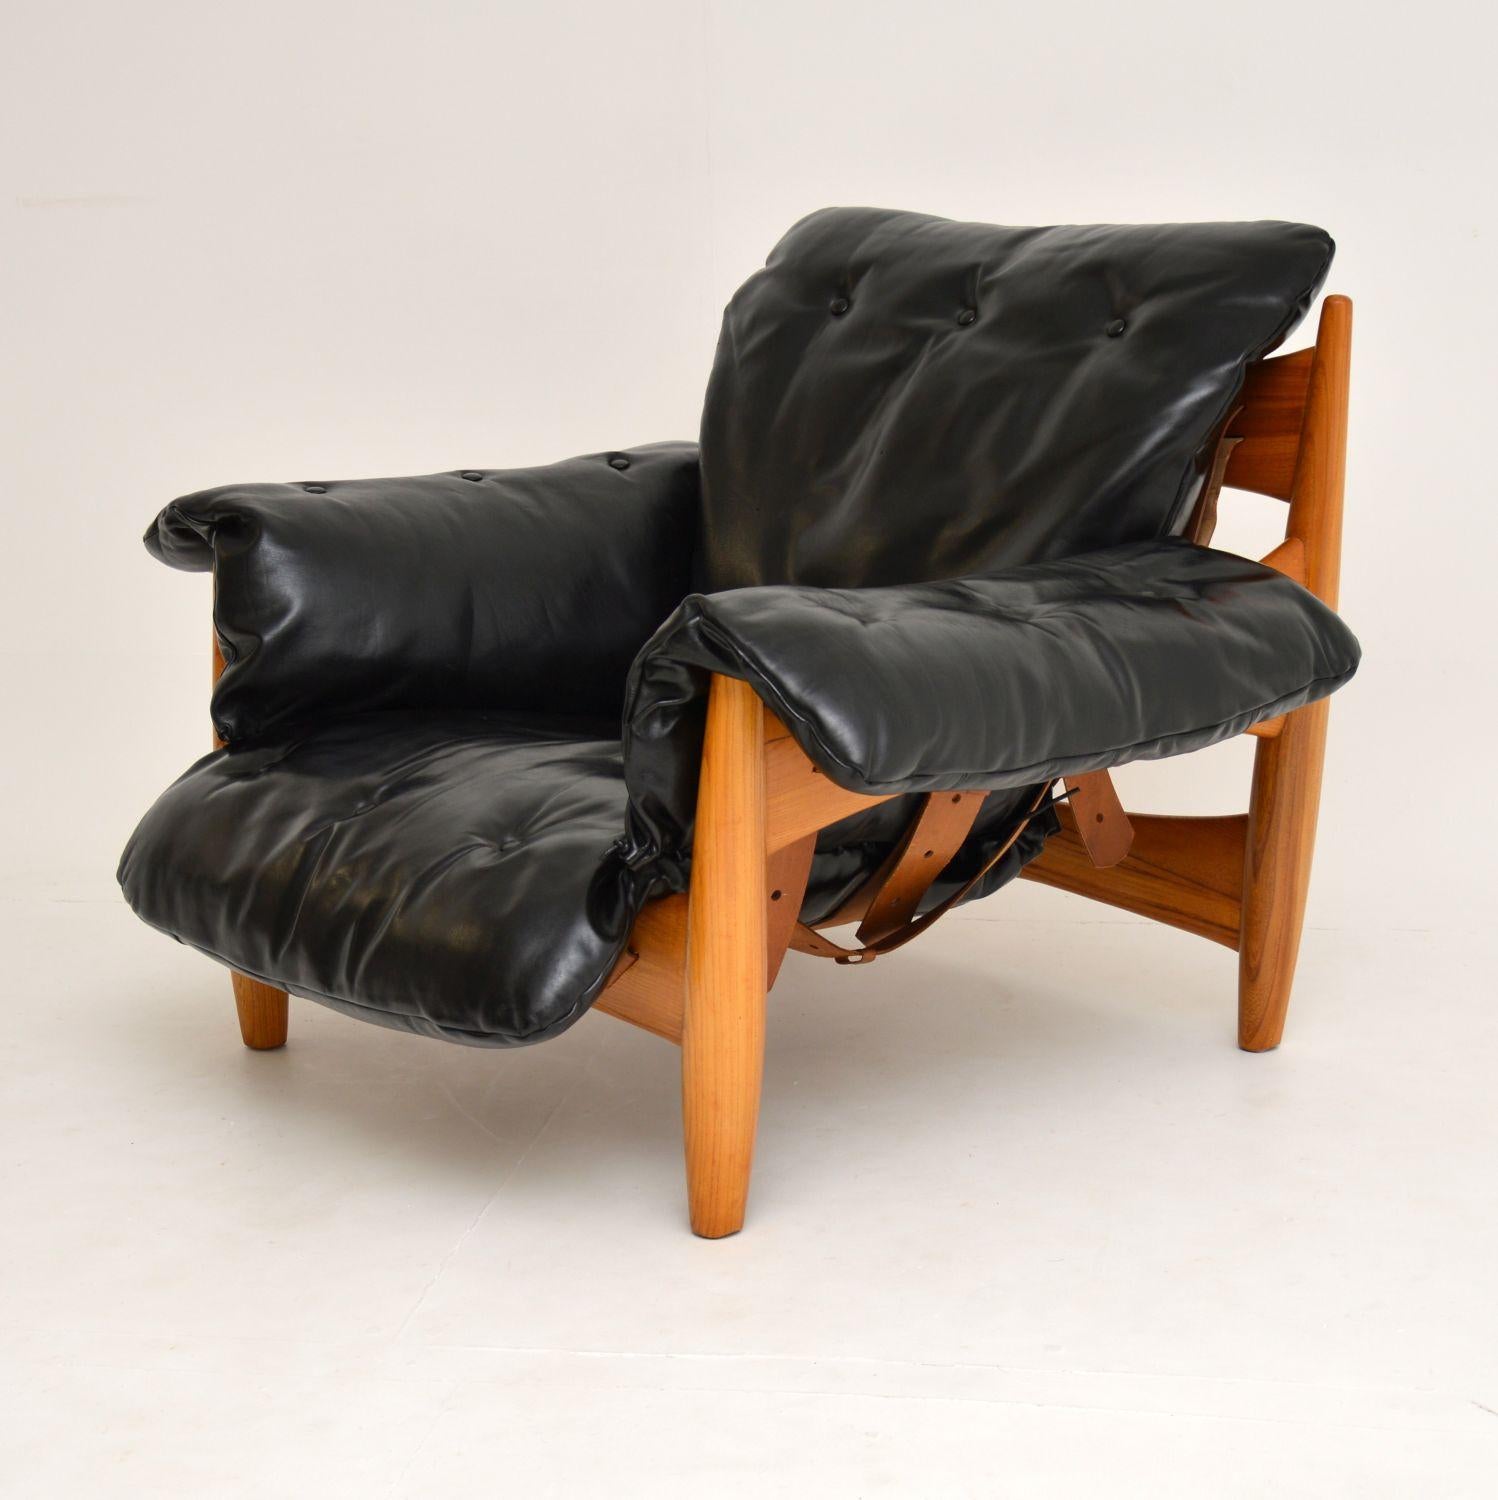 Mid-Century Modern Vintage “Sheriff” Leather Armchair by Sergio Rodrigues for ISA